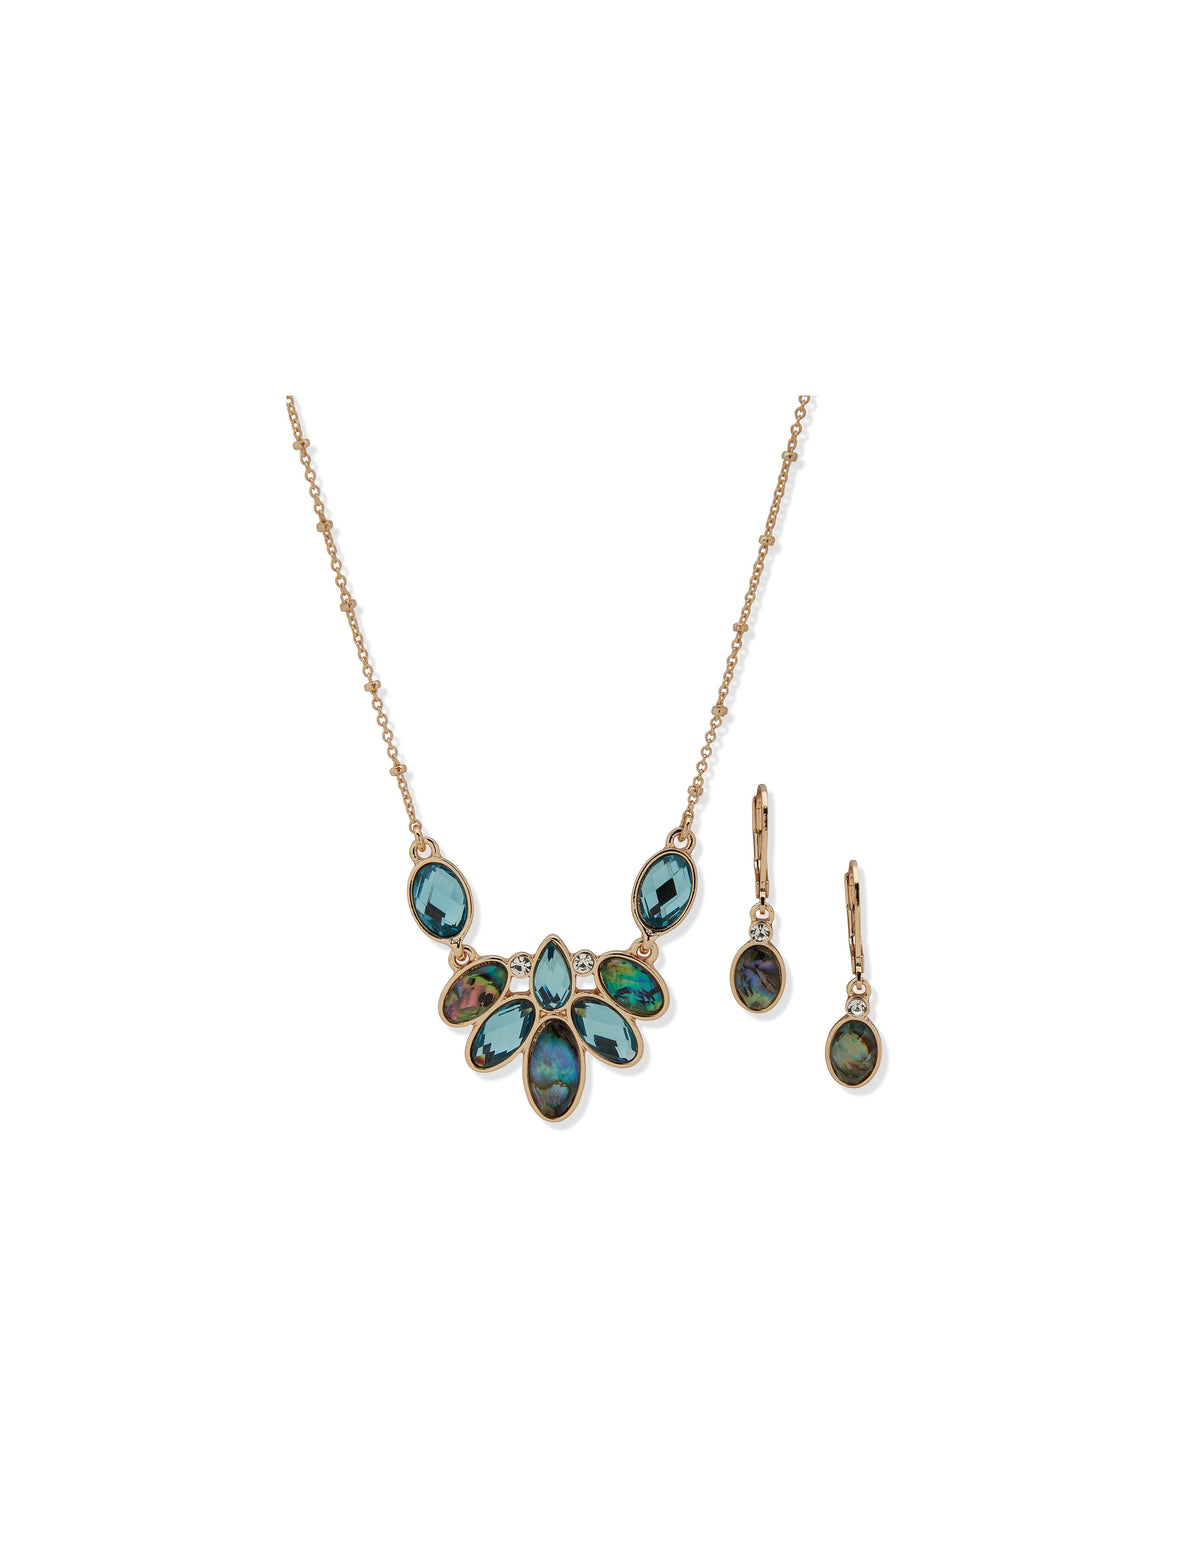 Anne Klein Gold Tone Stone Cluster Necklace and Earring Set